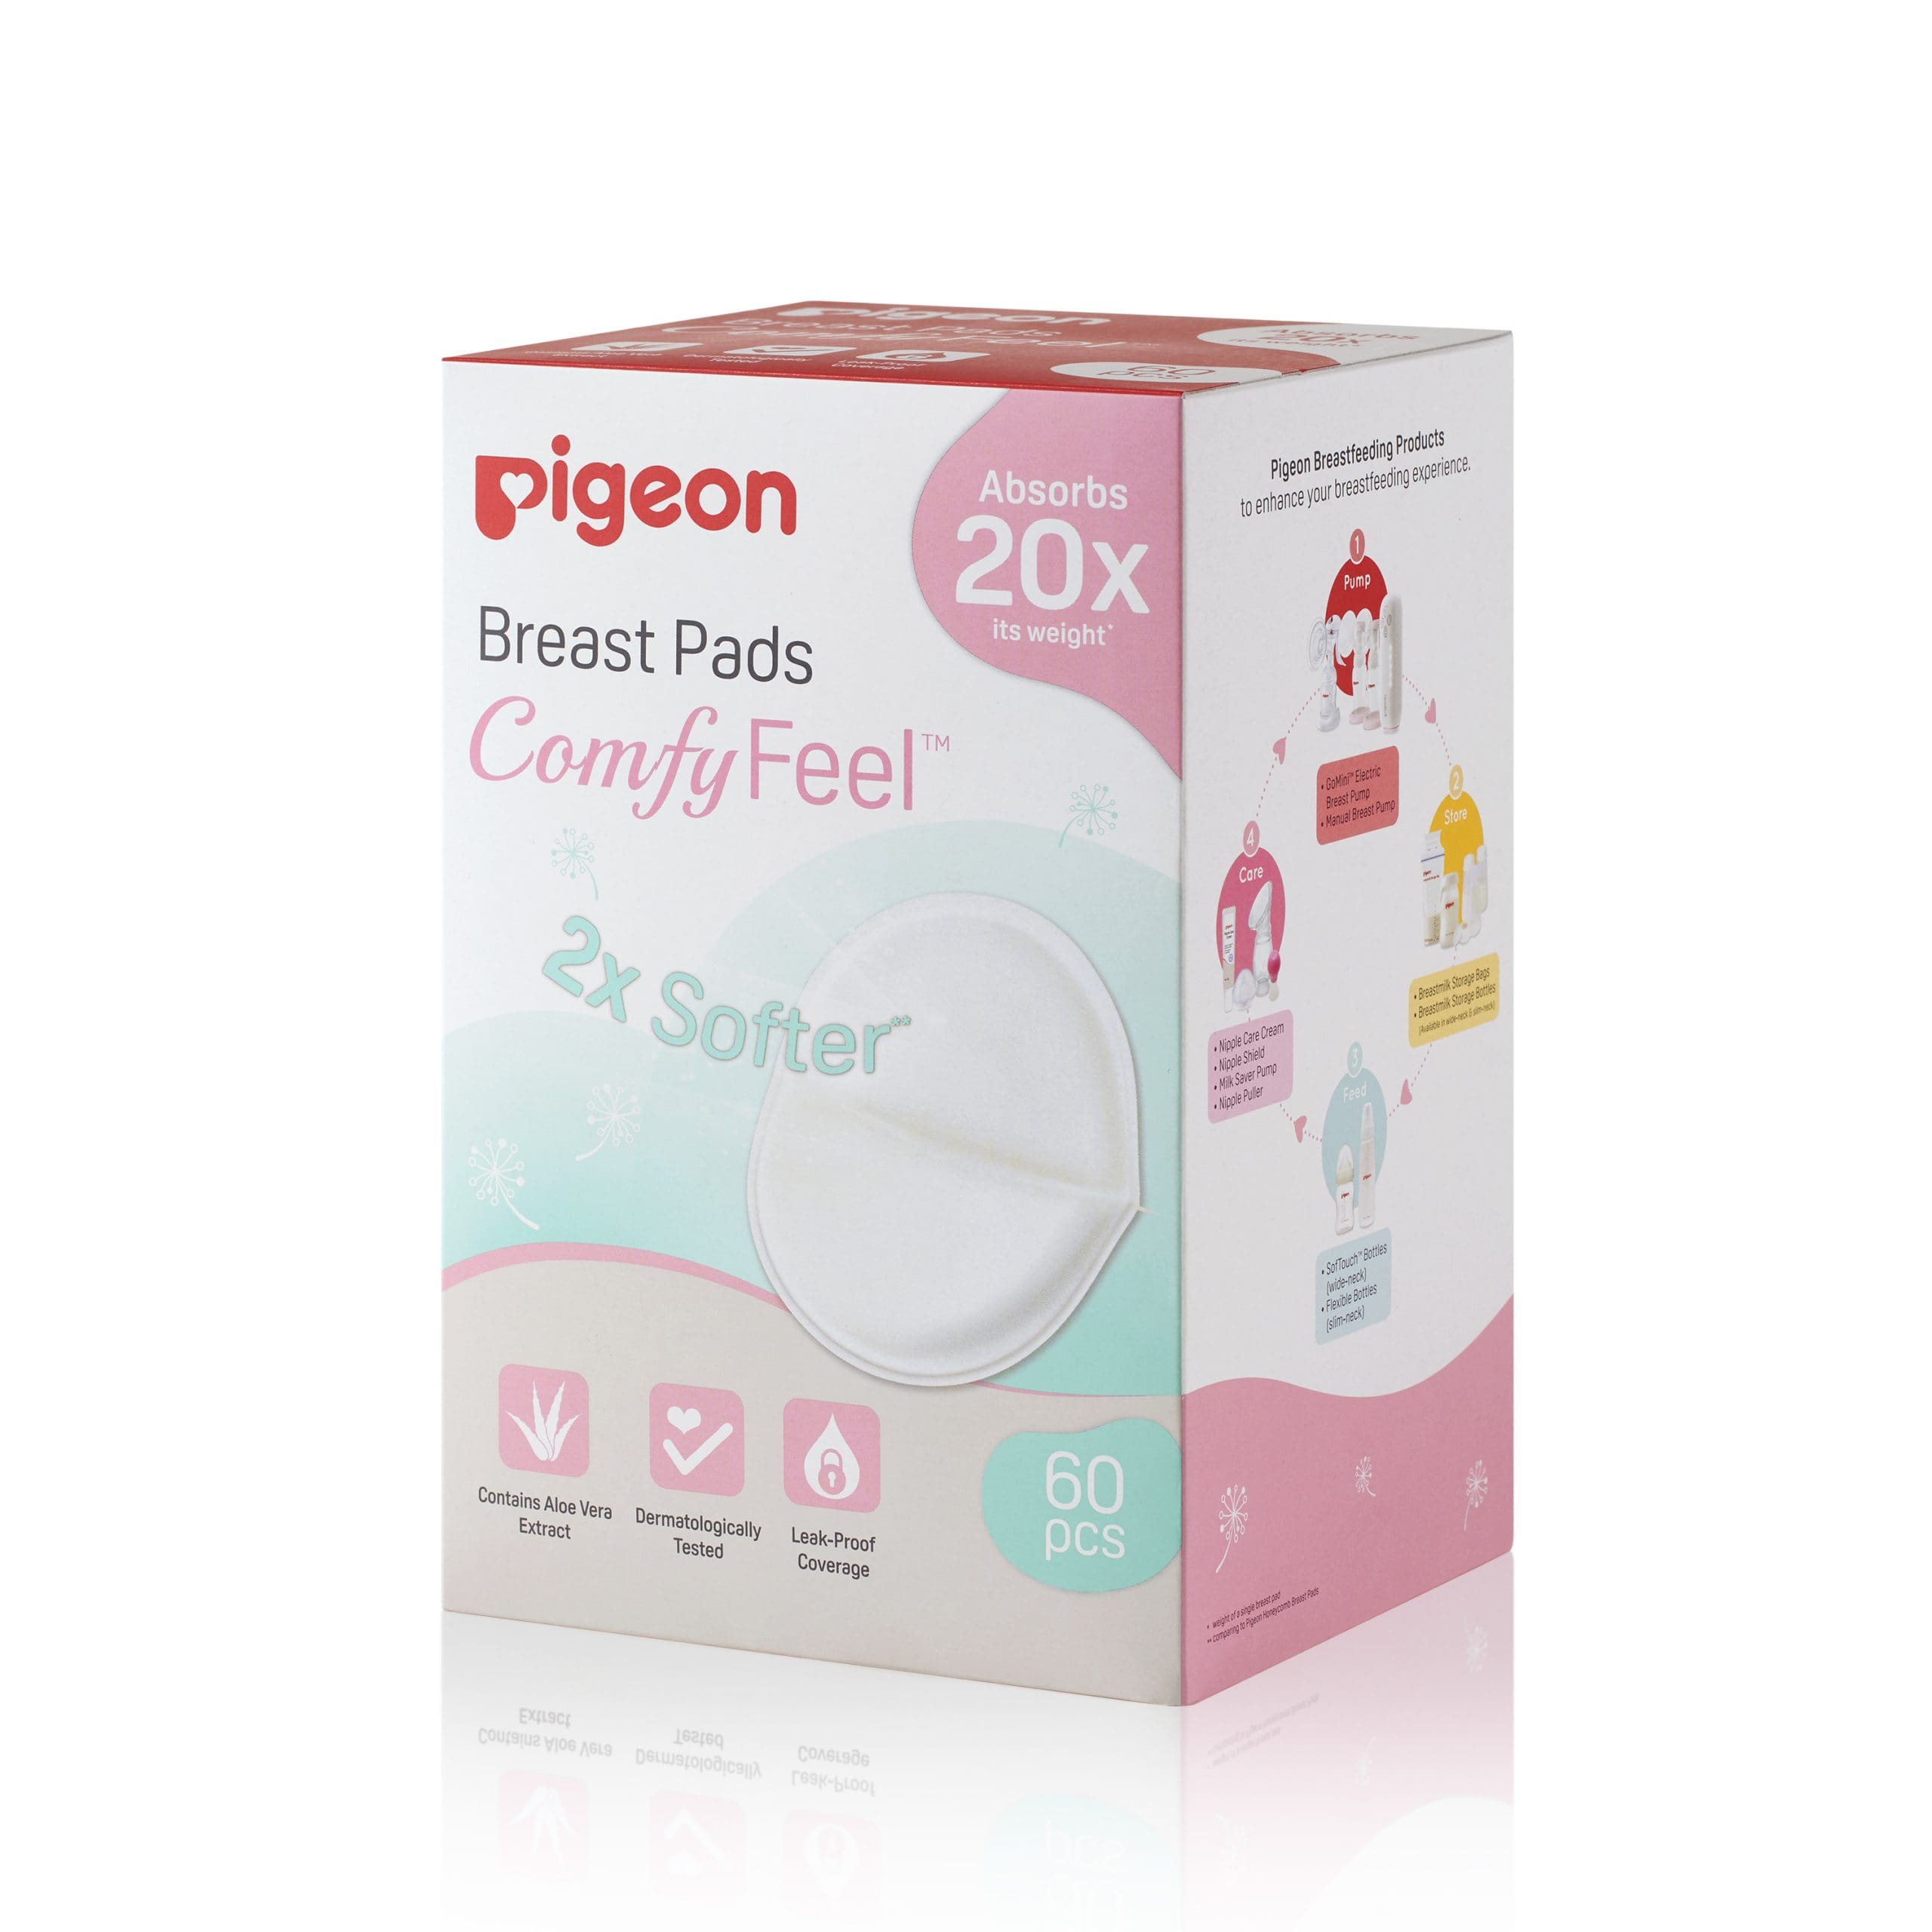 https://pigeon.com.sg/wp-content/uploads/2021/04/79253_ComfyFeel-Breast-Pads-EN-60pc_packaging_Angled-right-3000-x-3000-scaled.jpg